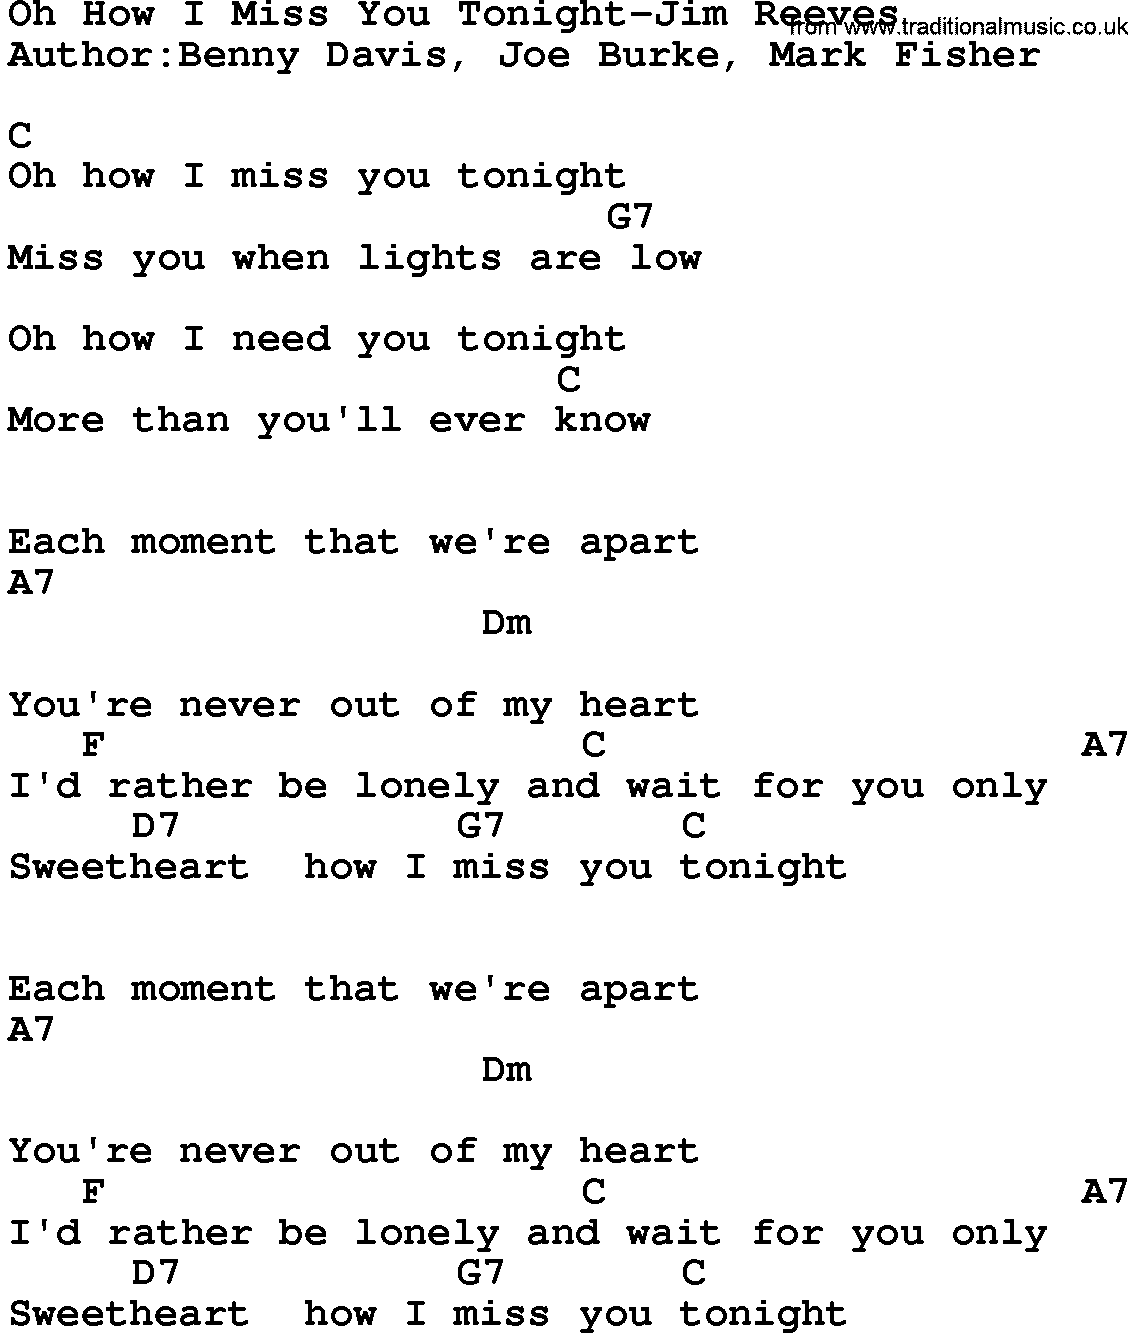 Country music song: Oh How I Miss You Tonight-Jim Reeves lyrics and chords